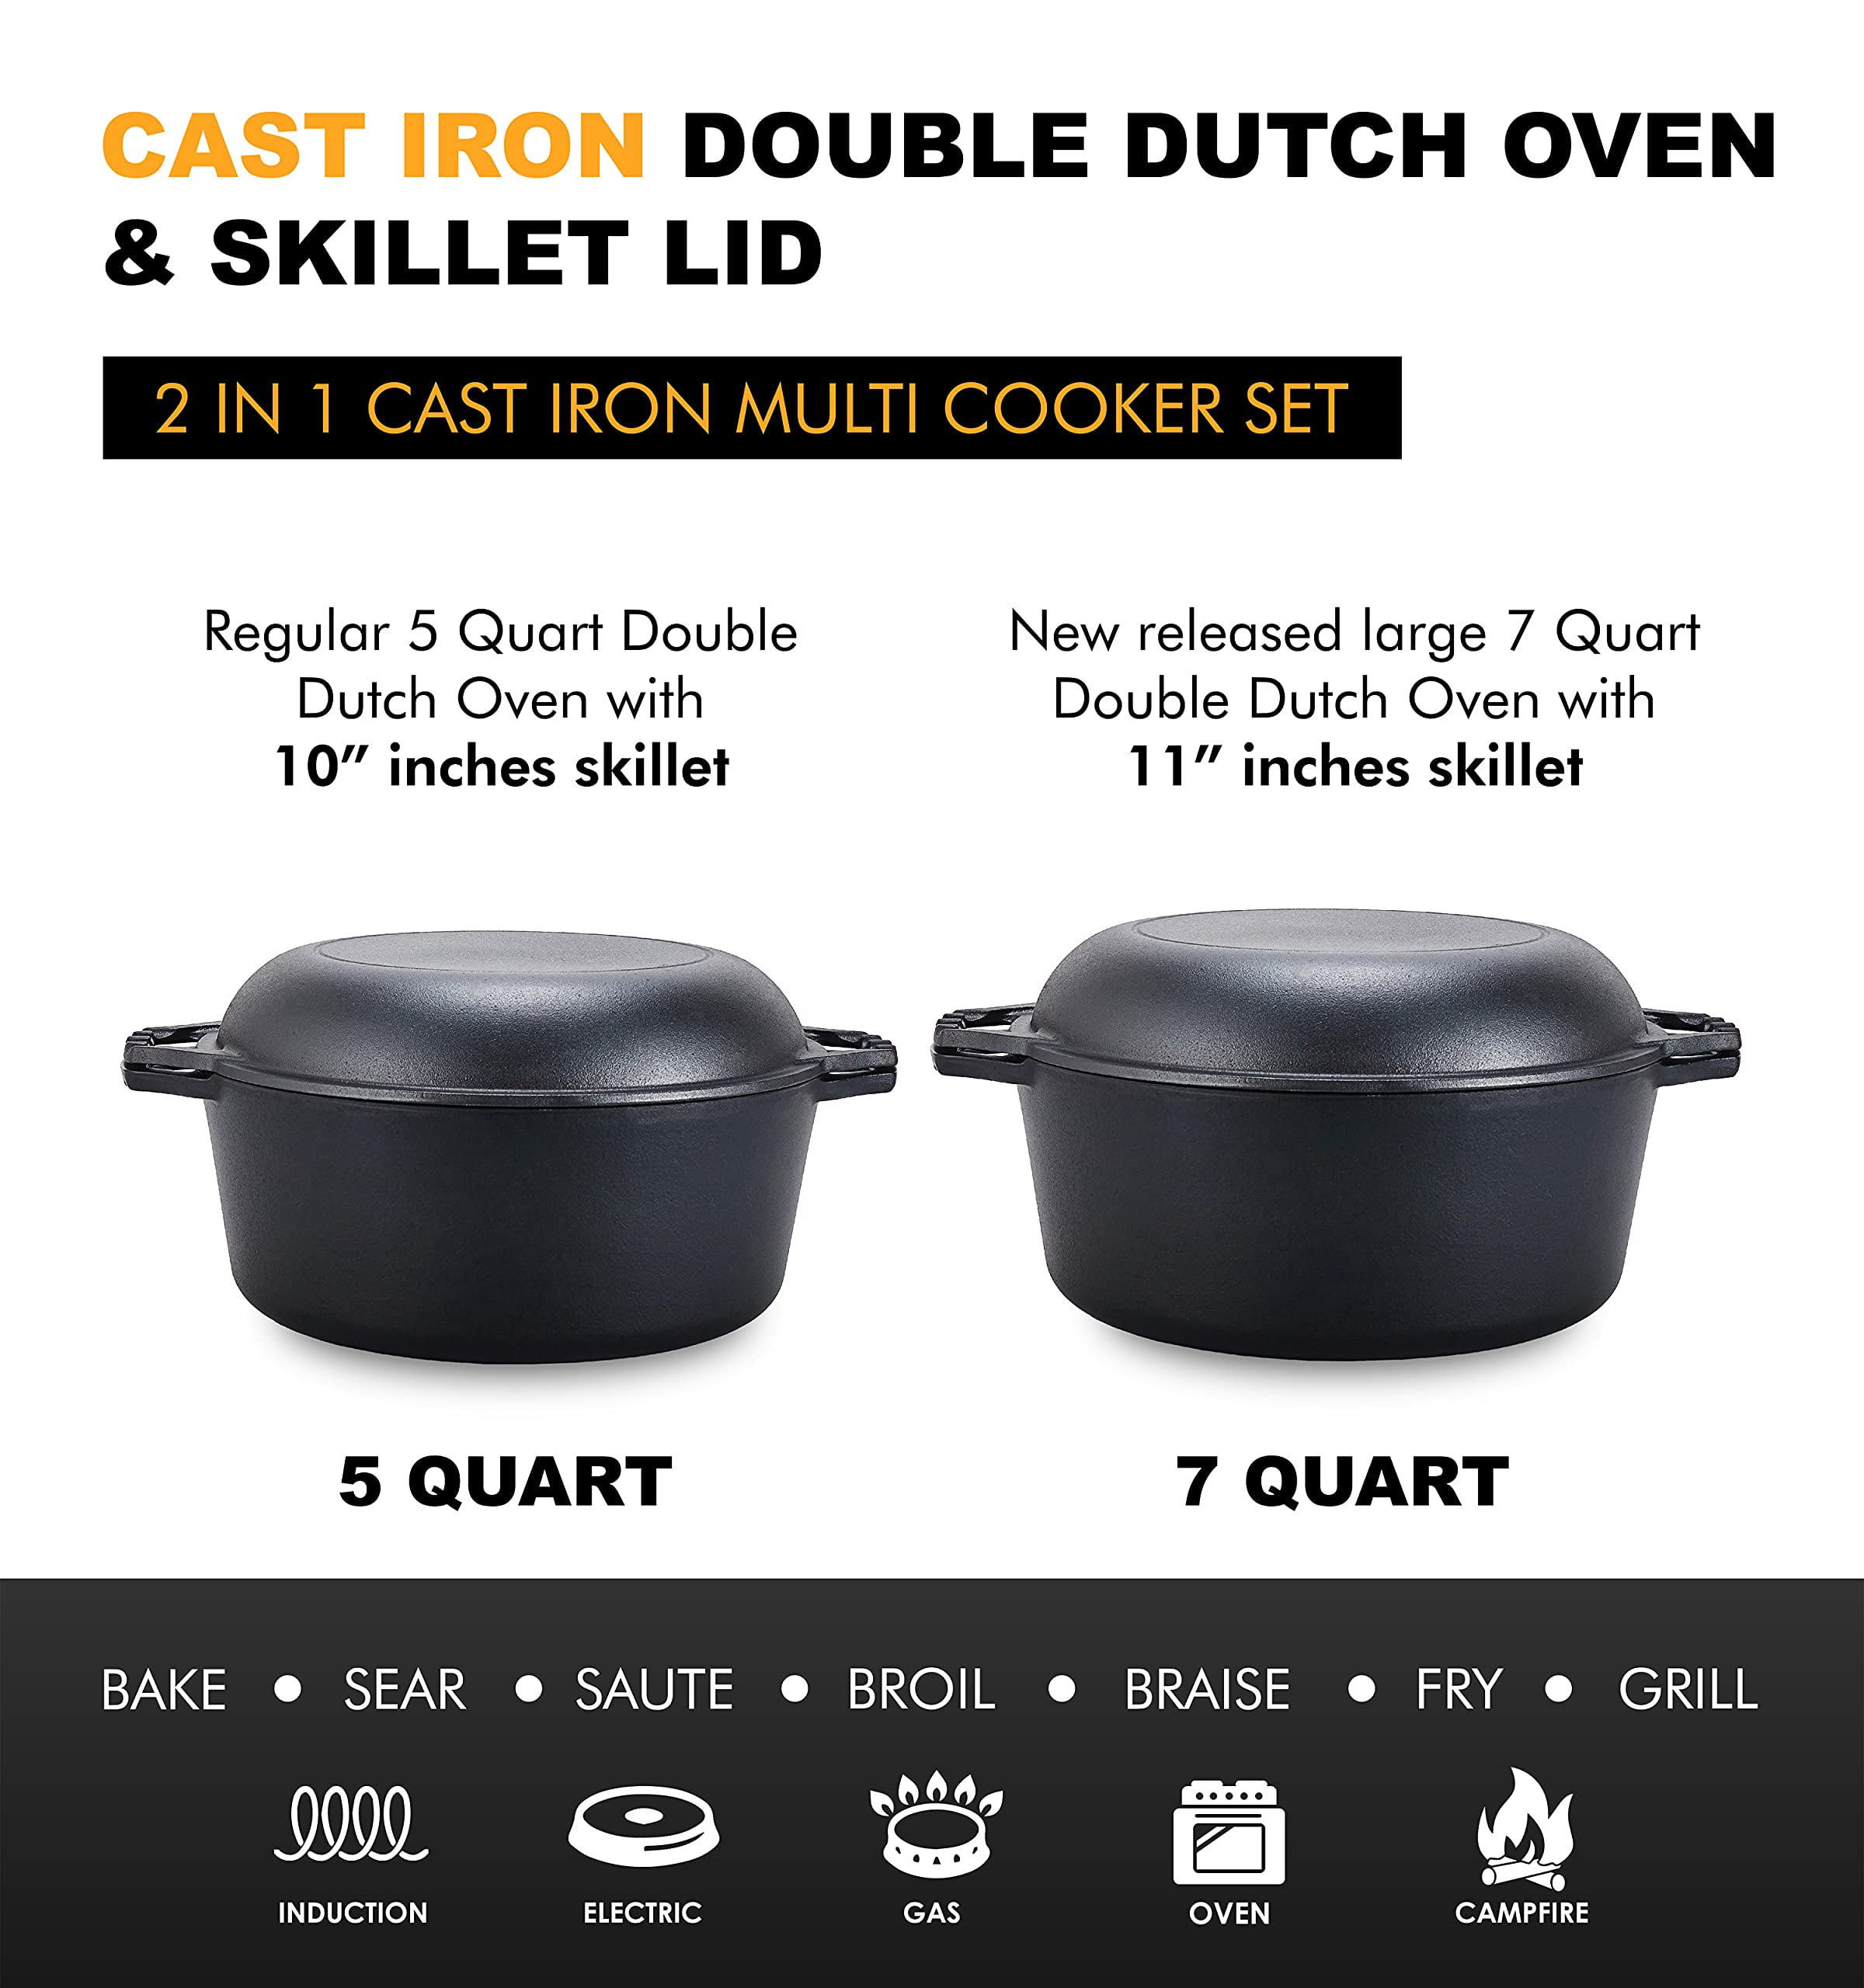 Lodge cast iron double dutch oven and casserole, Furniture & Home